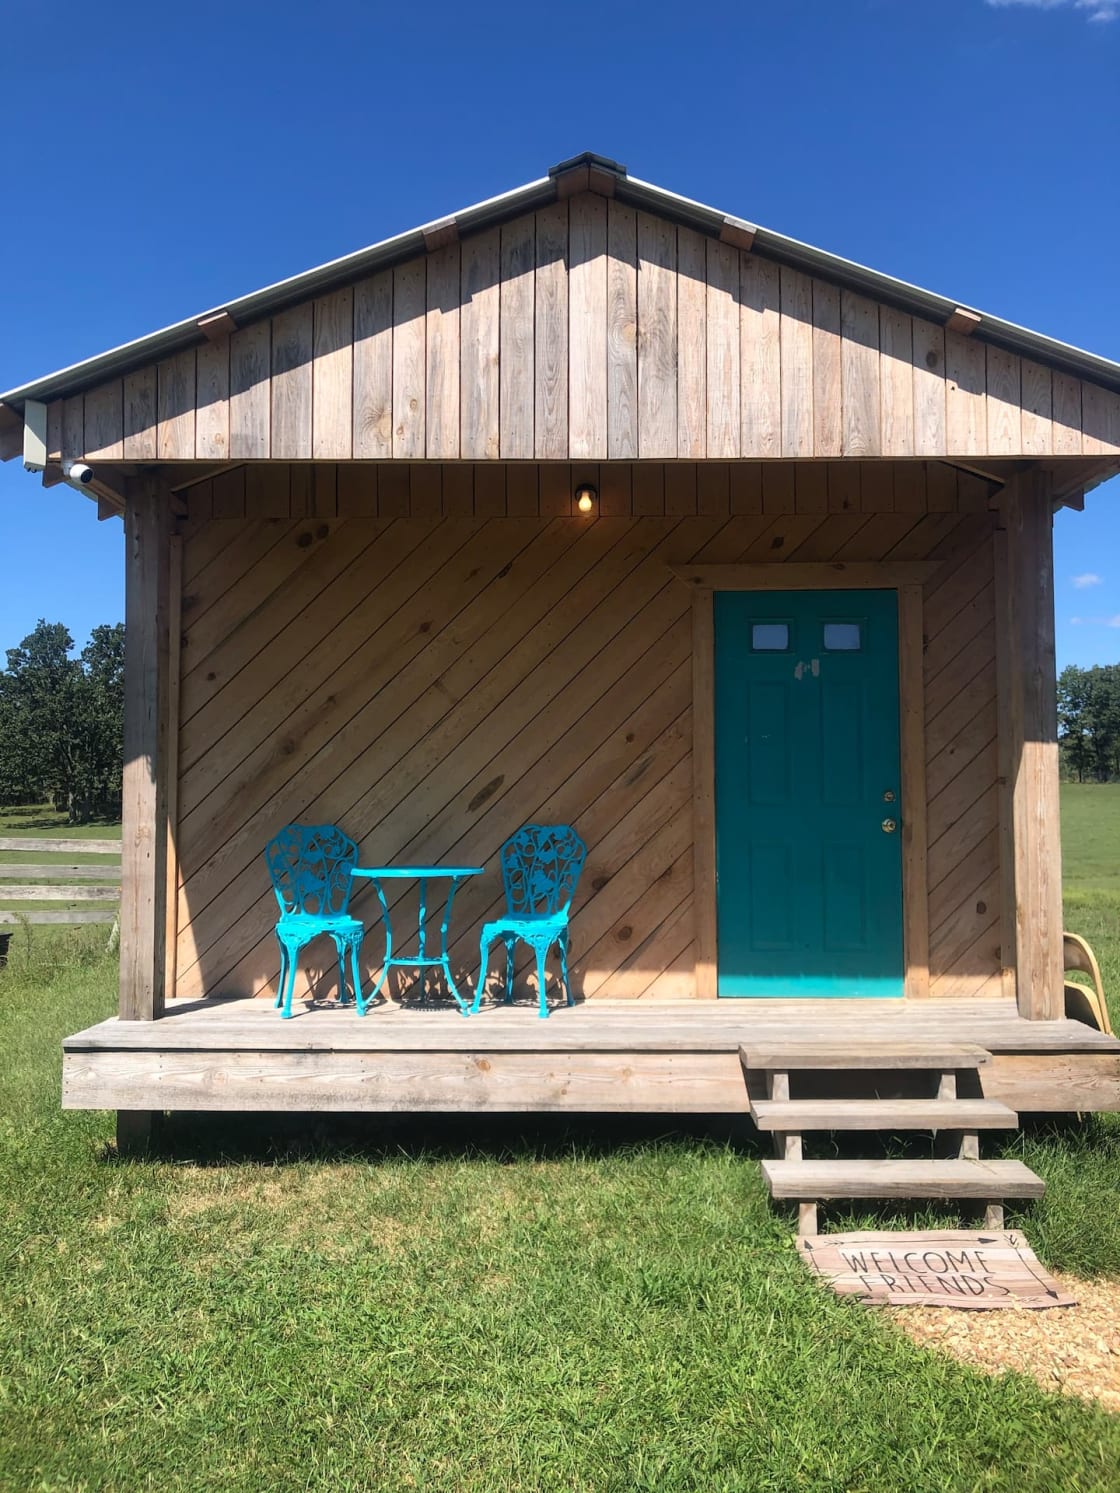 Delightful 1 bedroom peaceful tiny house